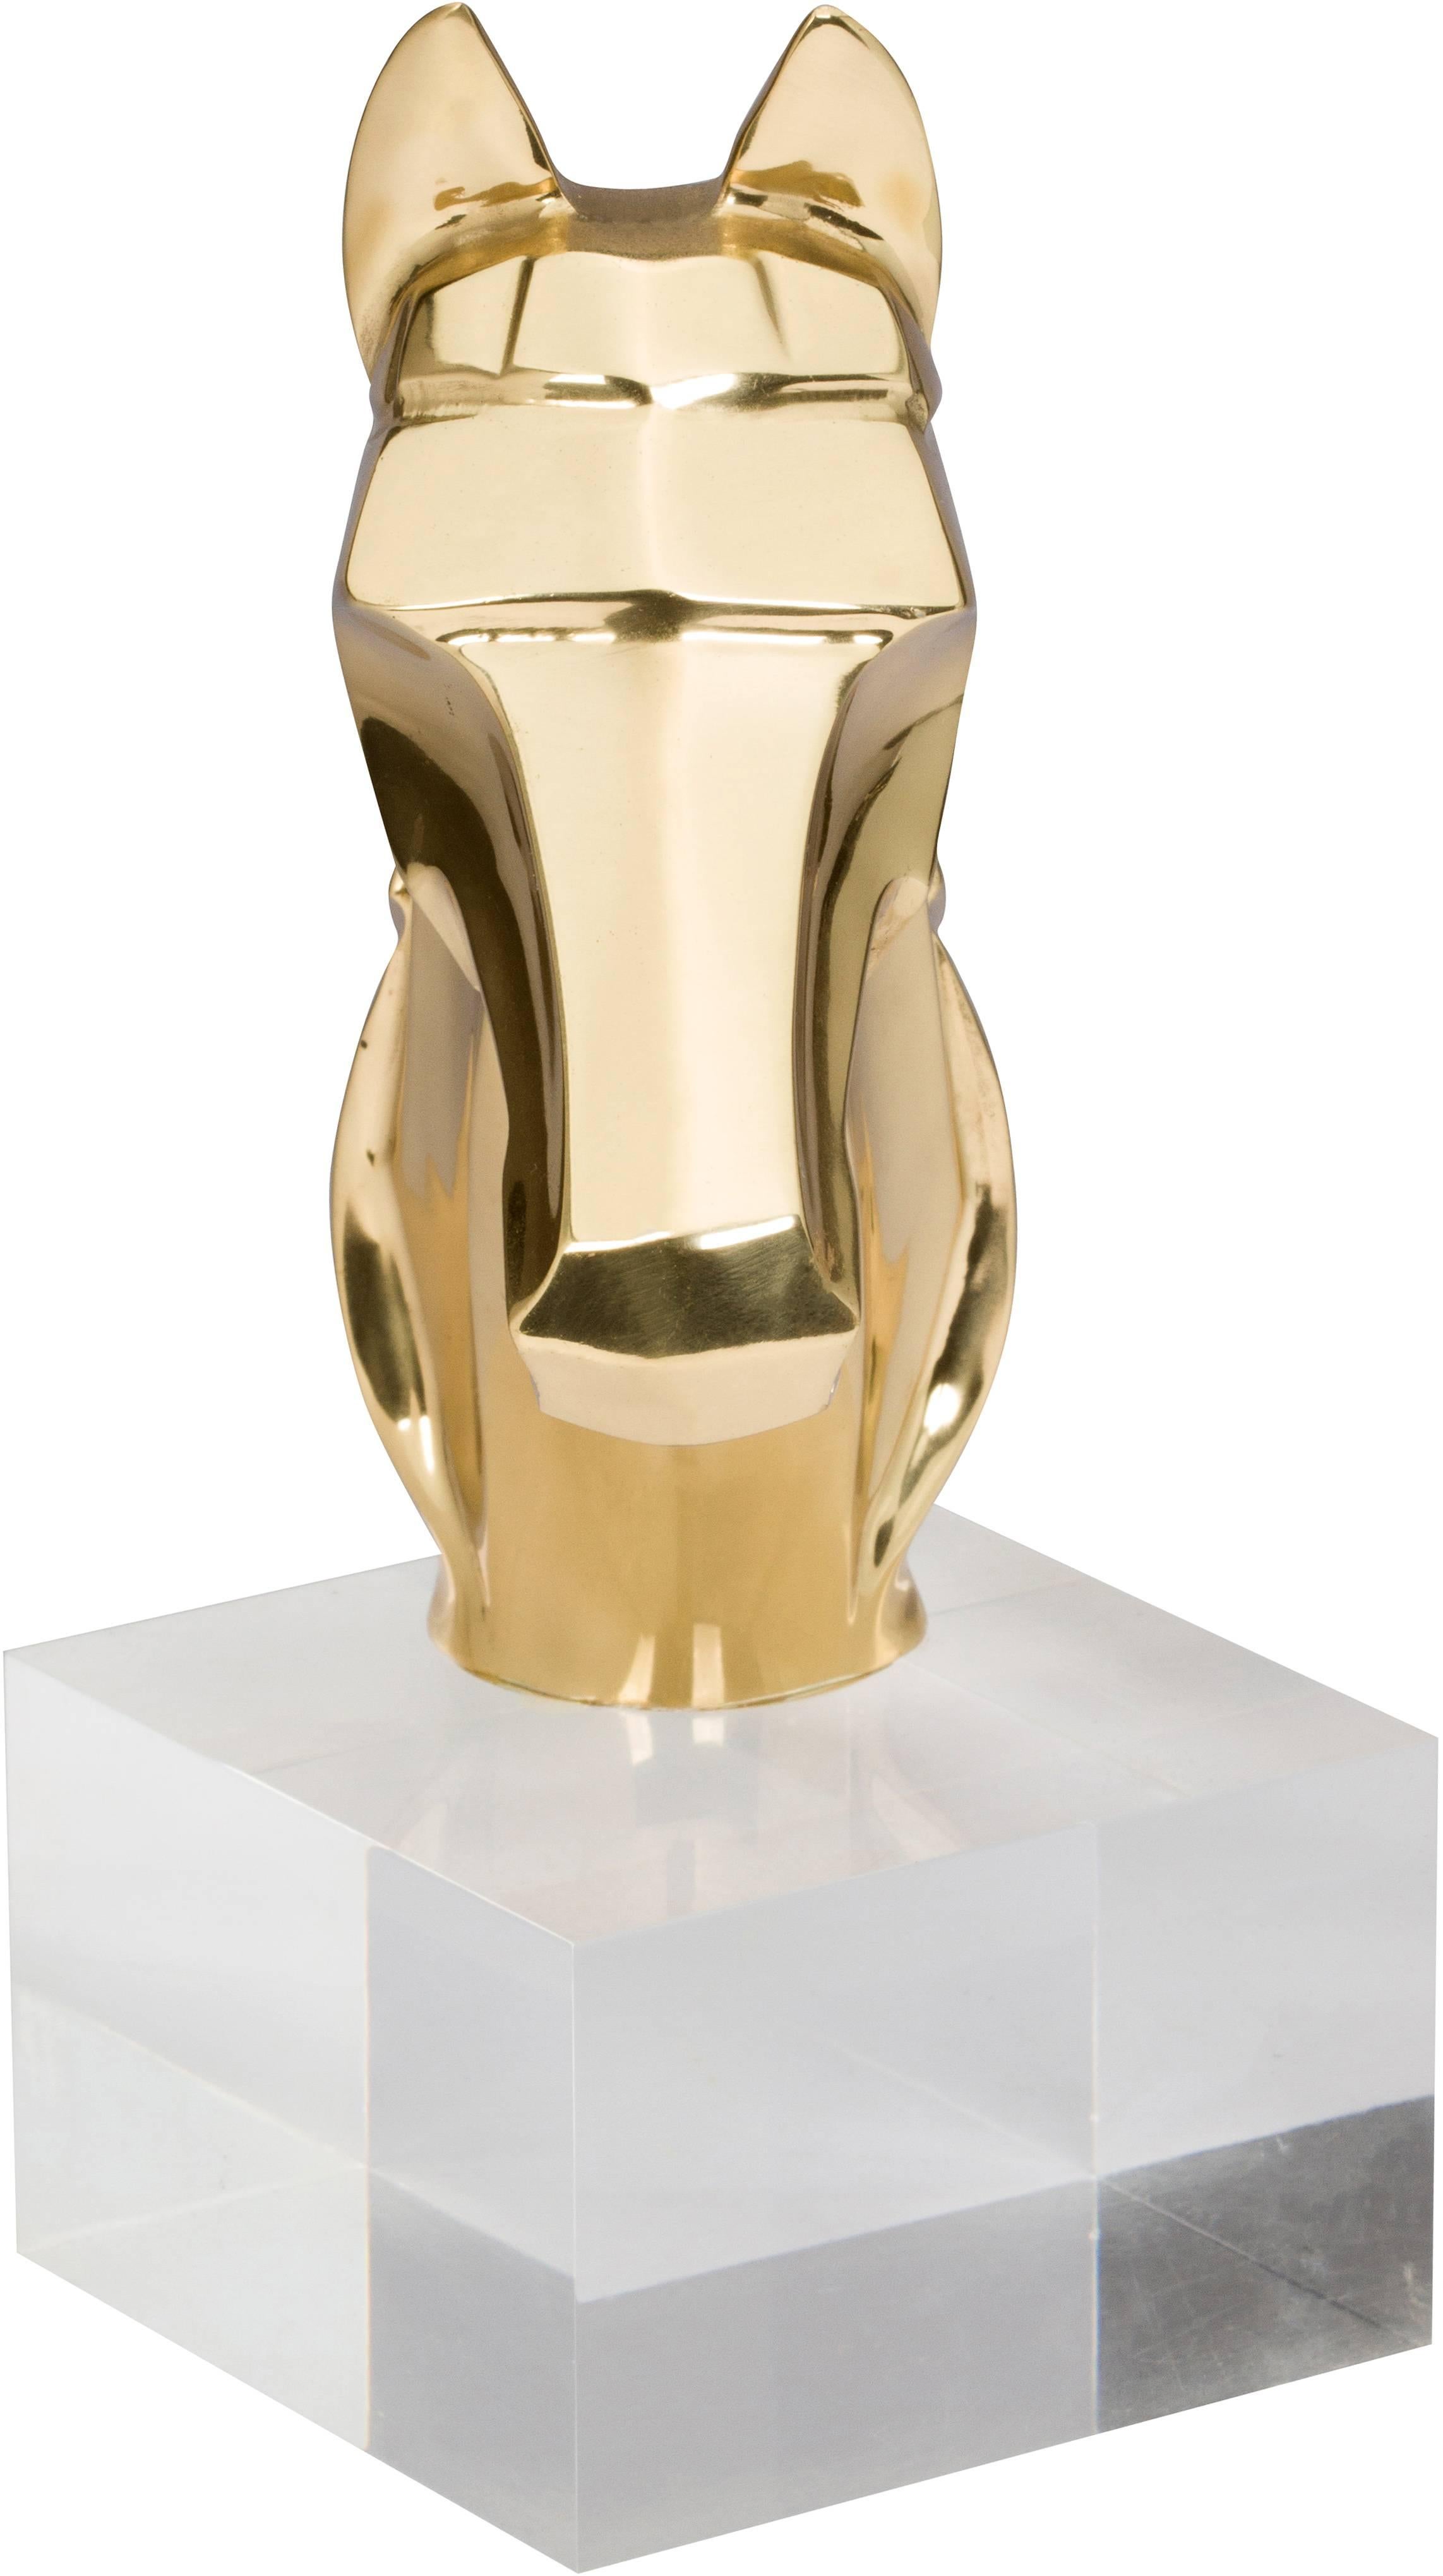 Mid-20th Century Pair of Brass and Lucite Horse Head Bookends